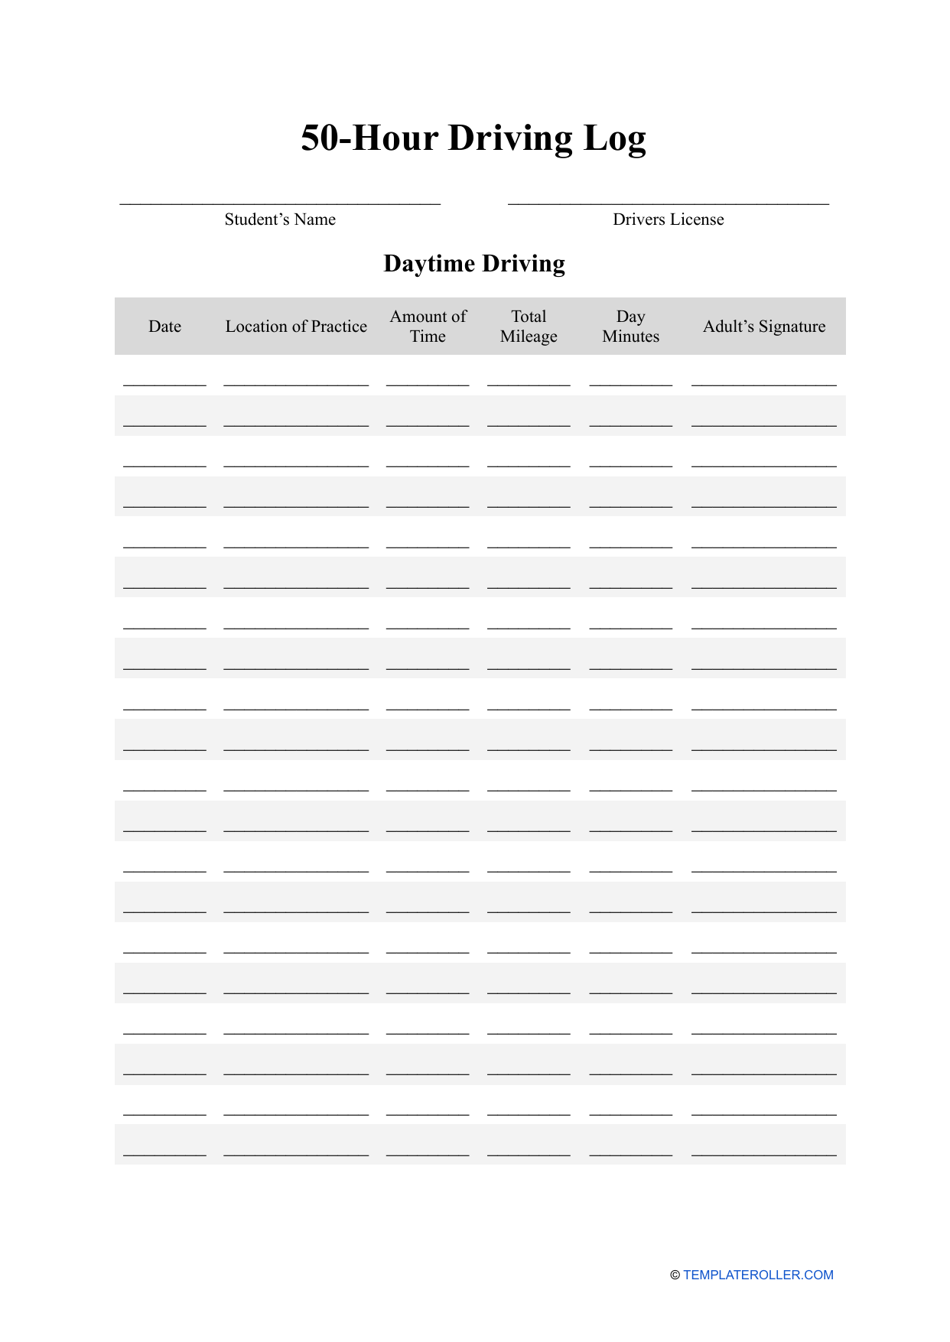 50 Hour Driving Log Sheet Template - Preview Image